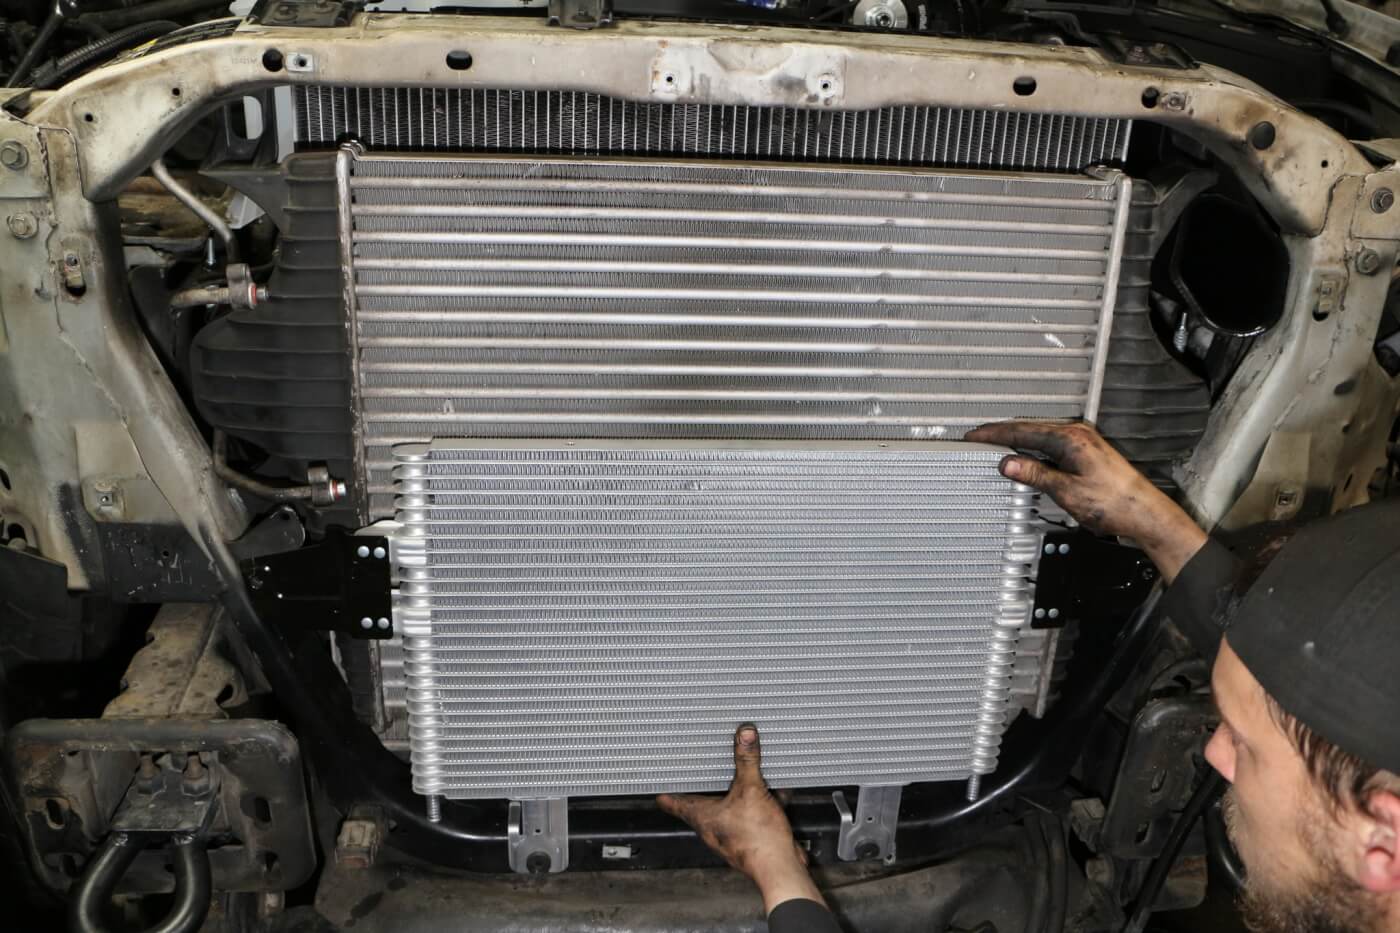 14. If your truck has had the automatic transmission fail catastrophically, a new oil cooler is recommended. This and flushing the hard lines will keep metal shavings from the old system from contaminating your new setup. Here you see a larger transmission oil cooler from a 6.0L Ford being installed. (The June 2015 issue of Diesel World has more on this upgrade.)